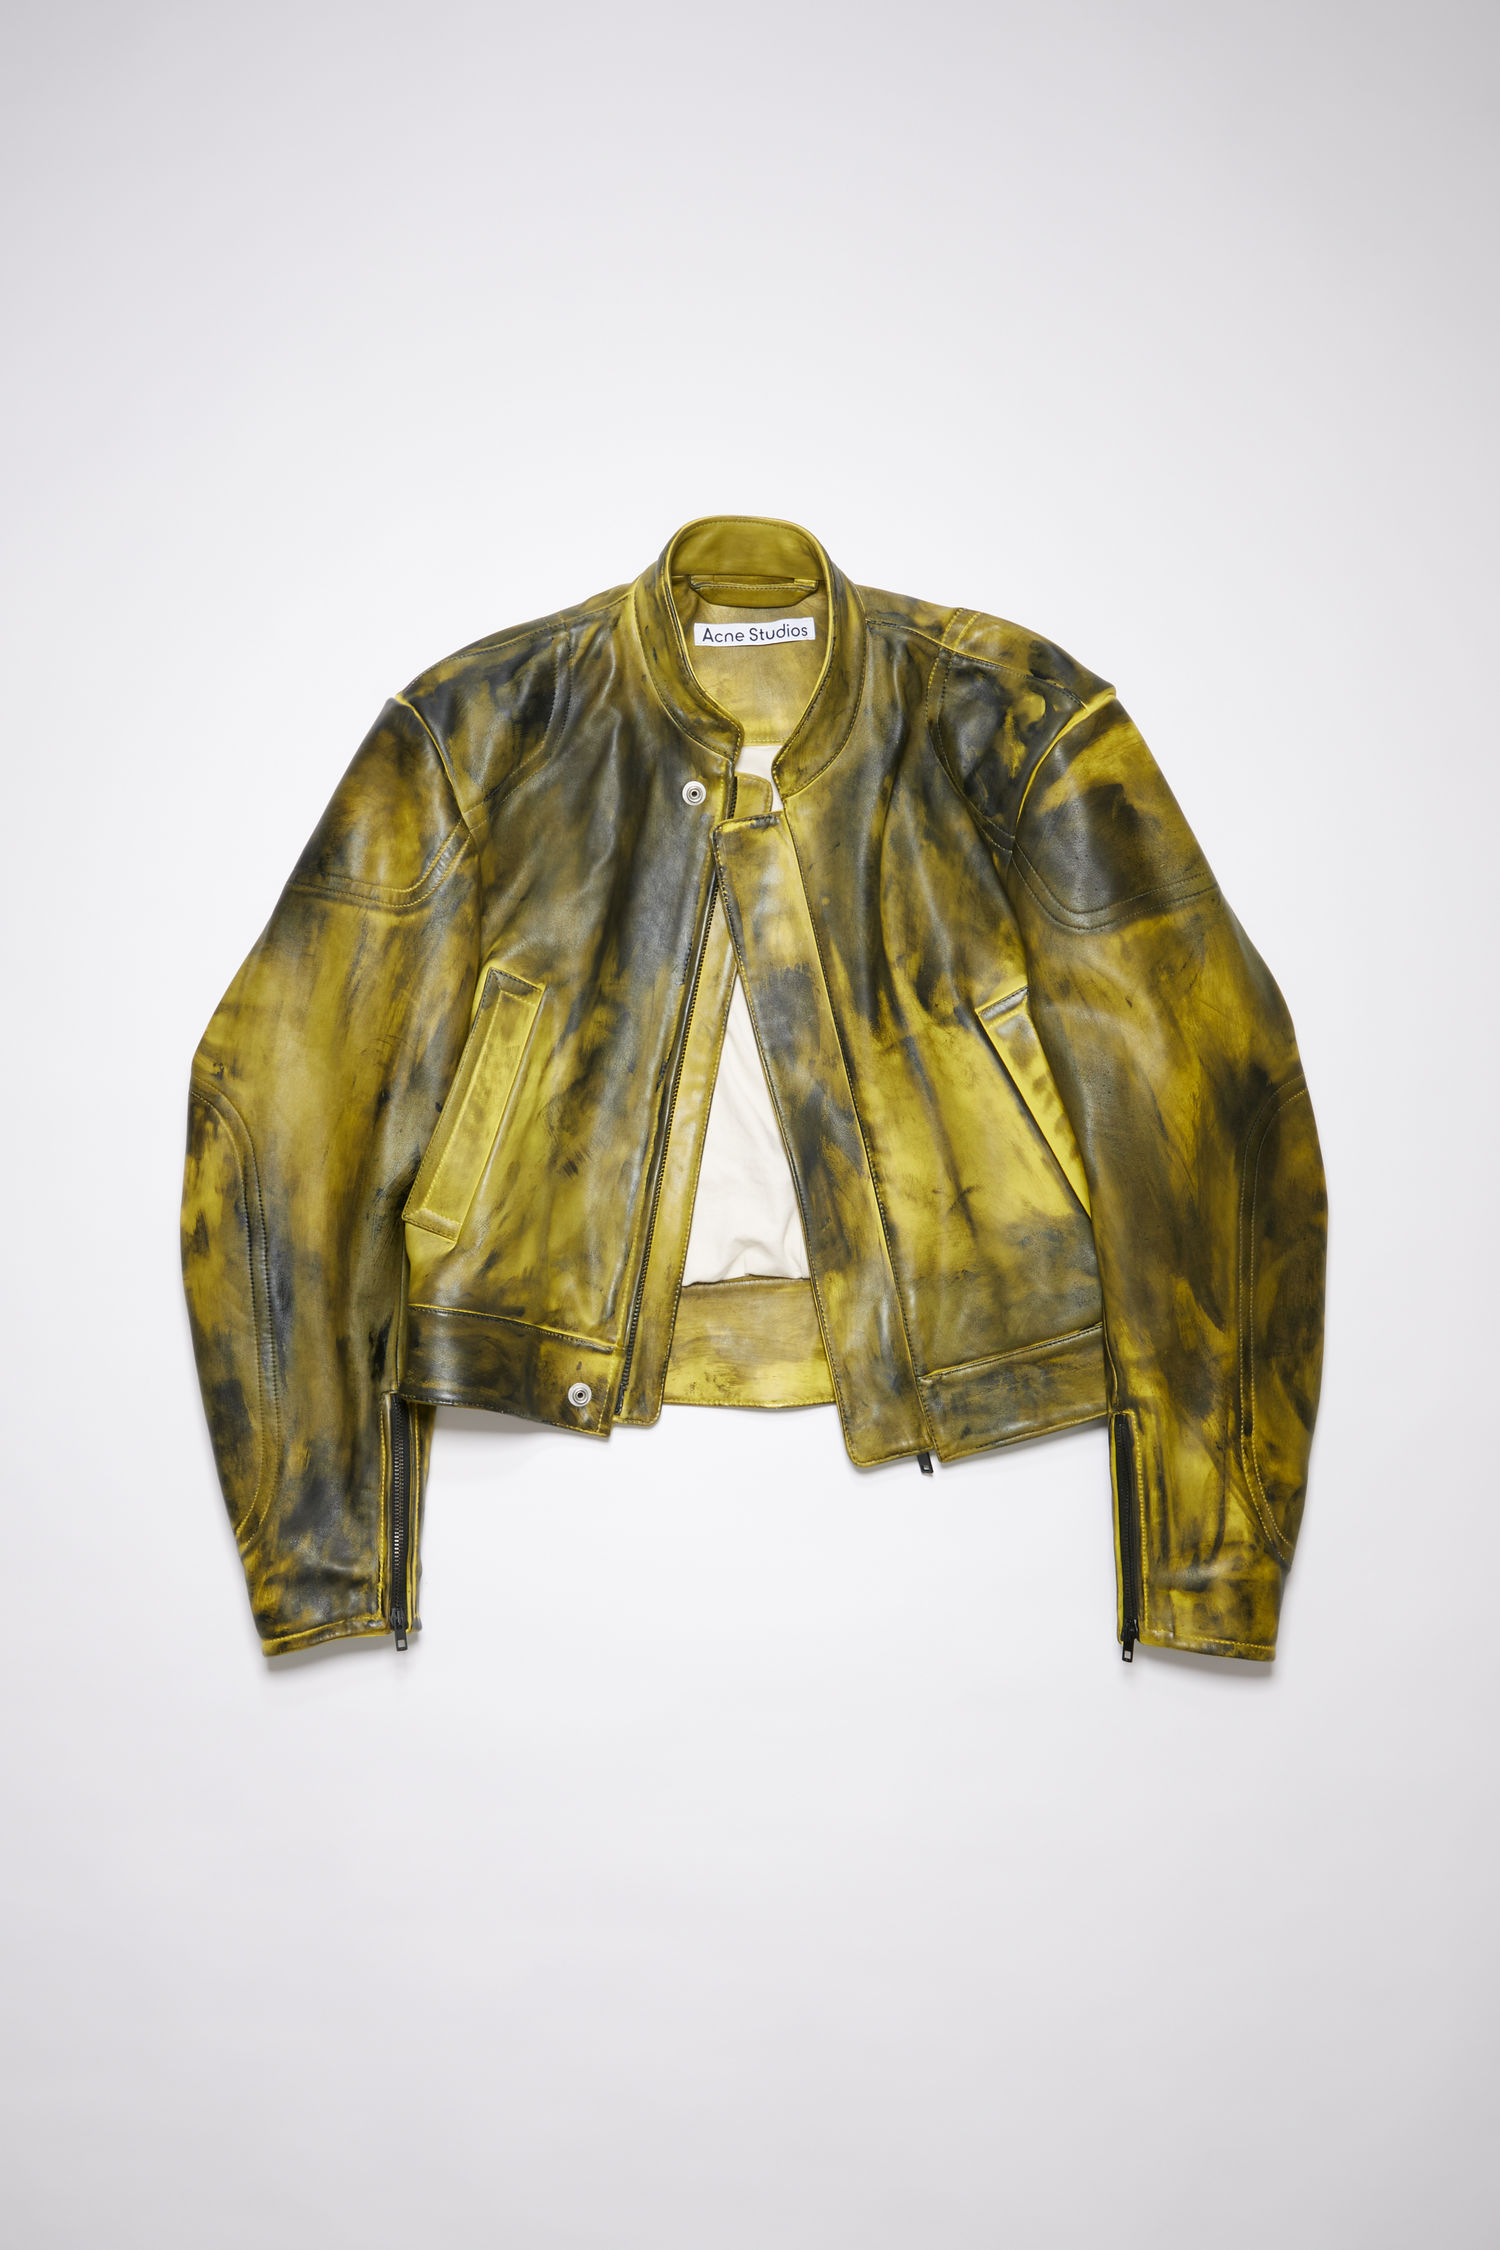 acnestudios.com | Hand-painted leather jacket